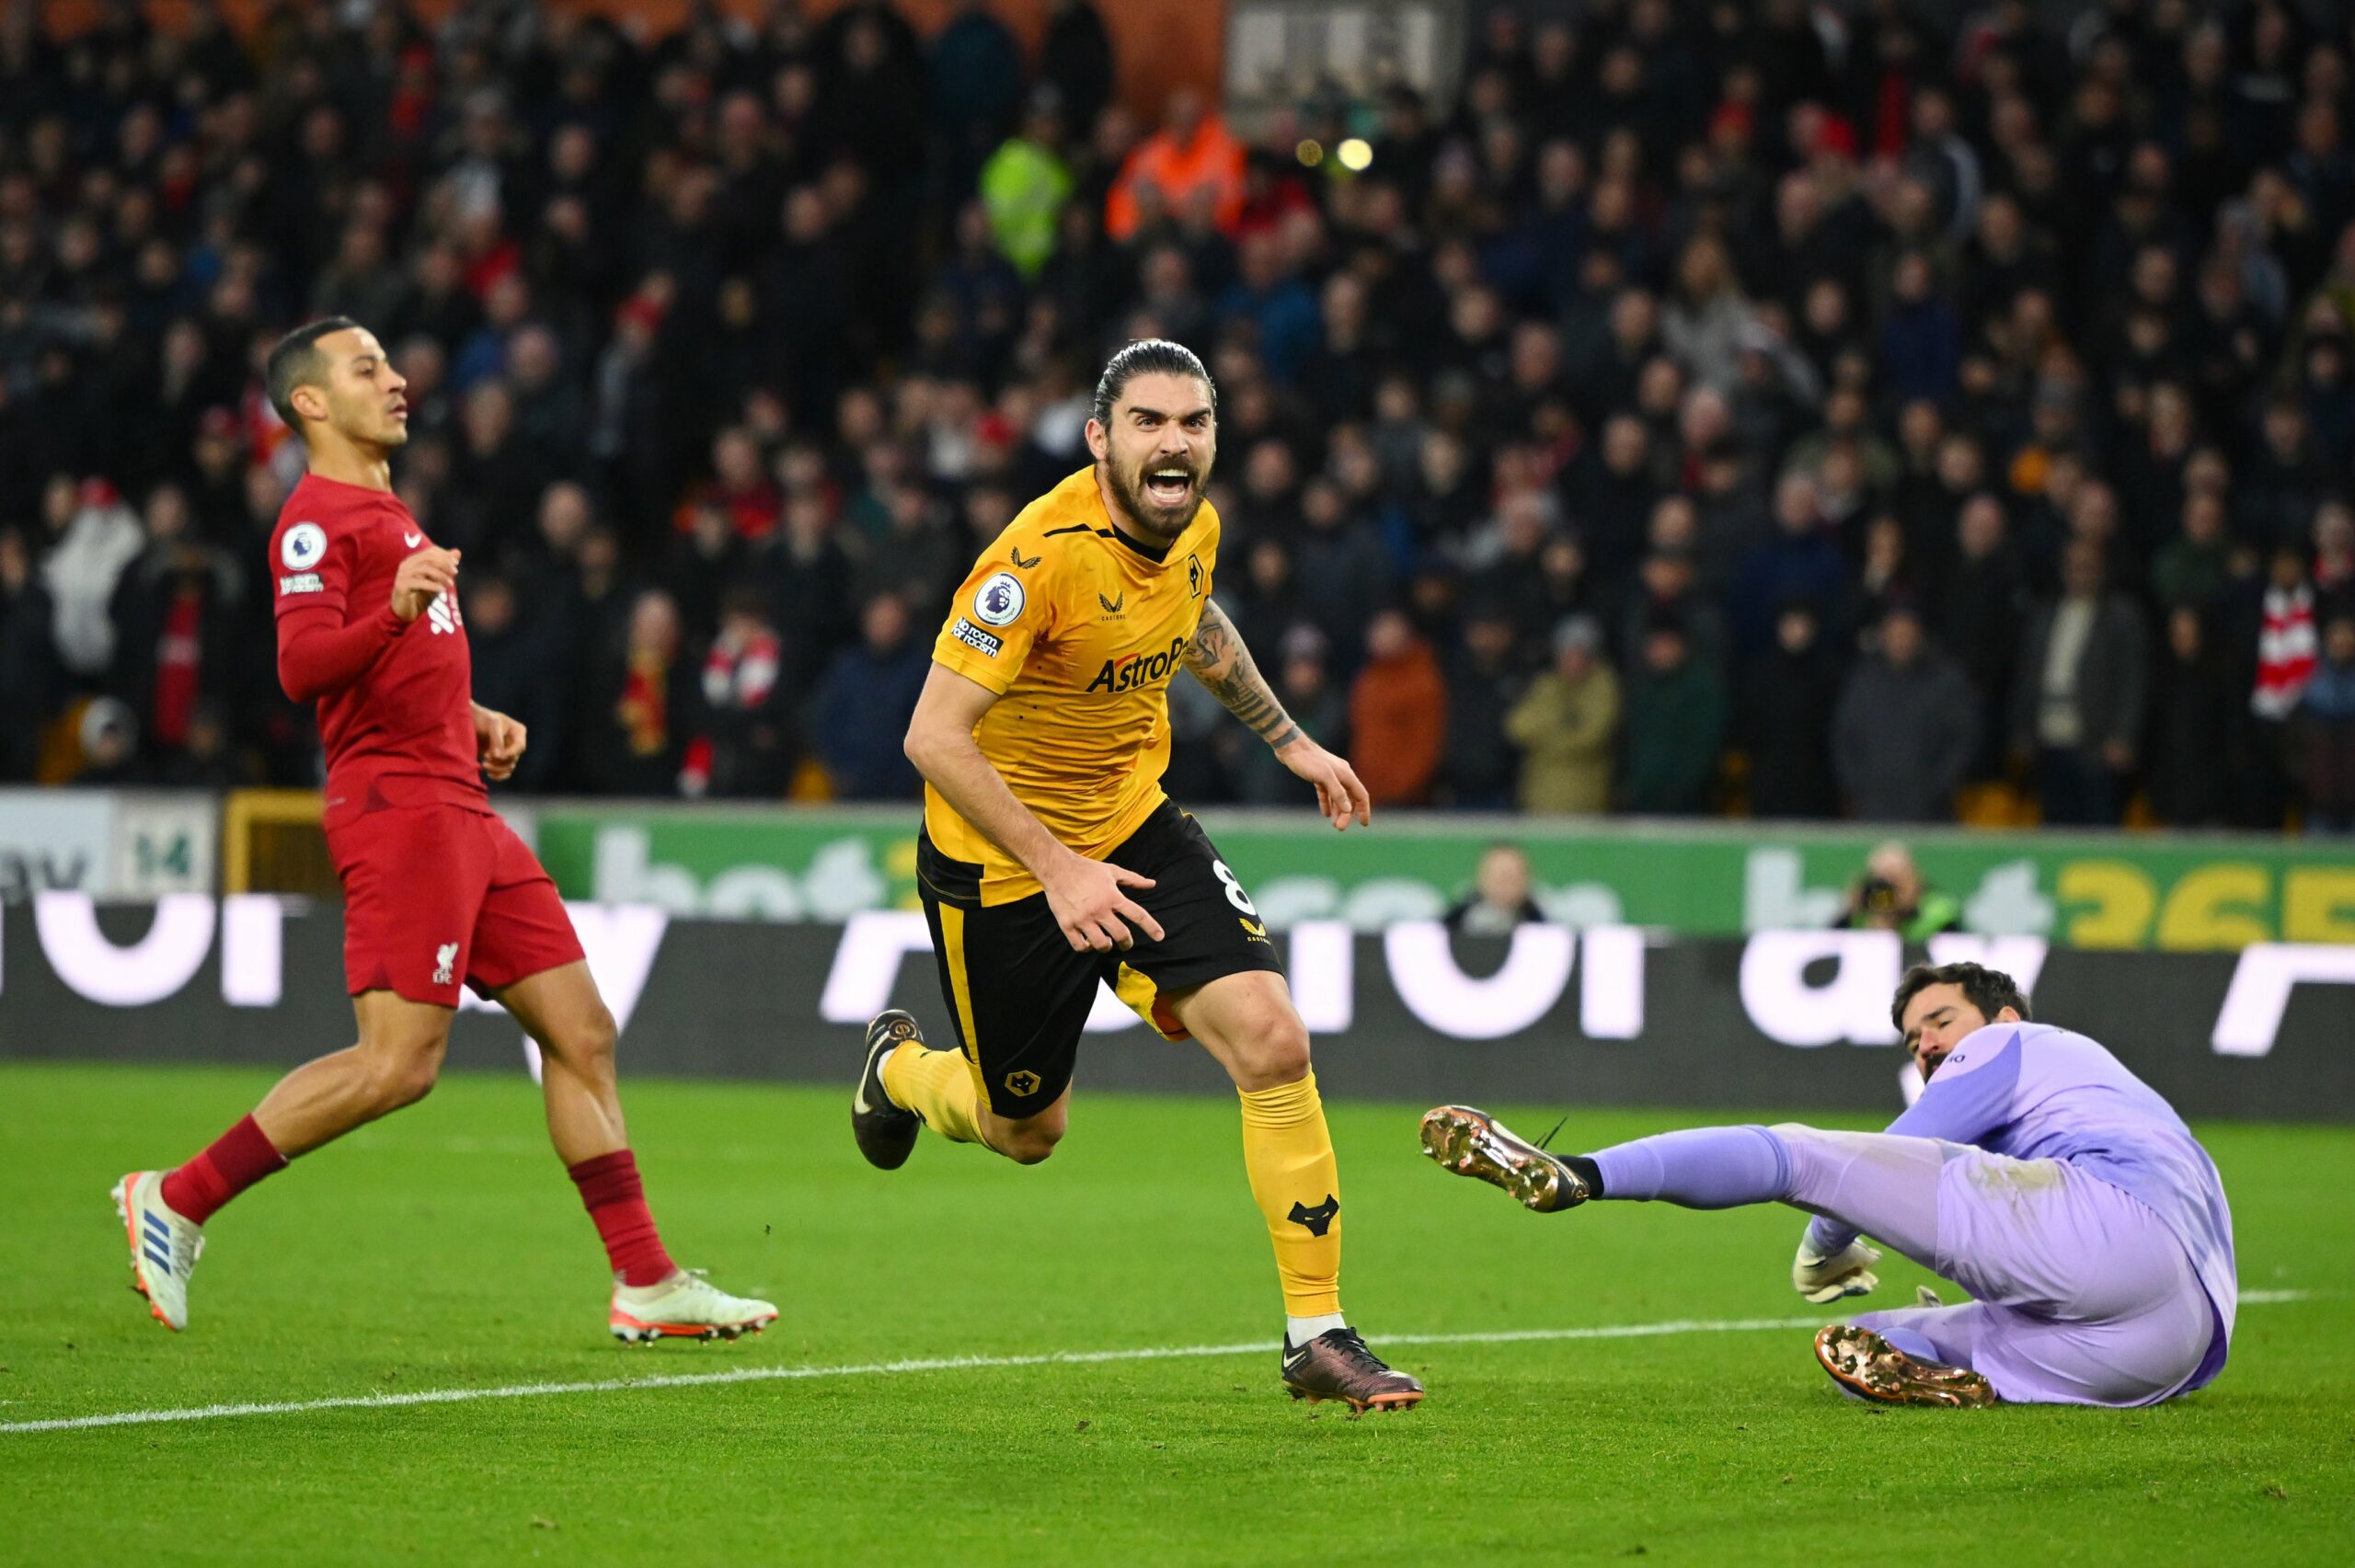 Wolves 3 - 0 Liverpool